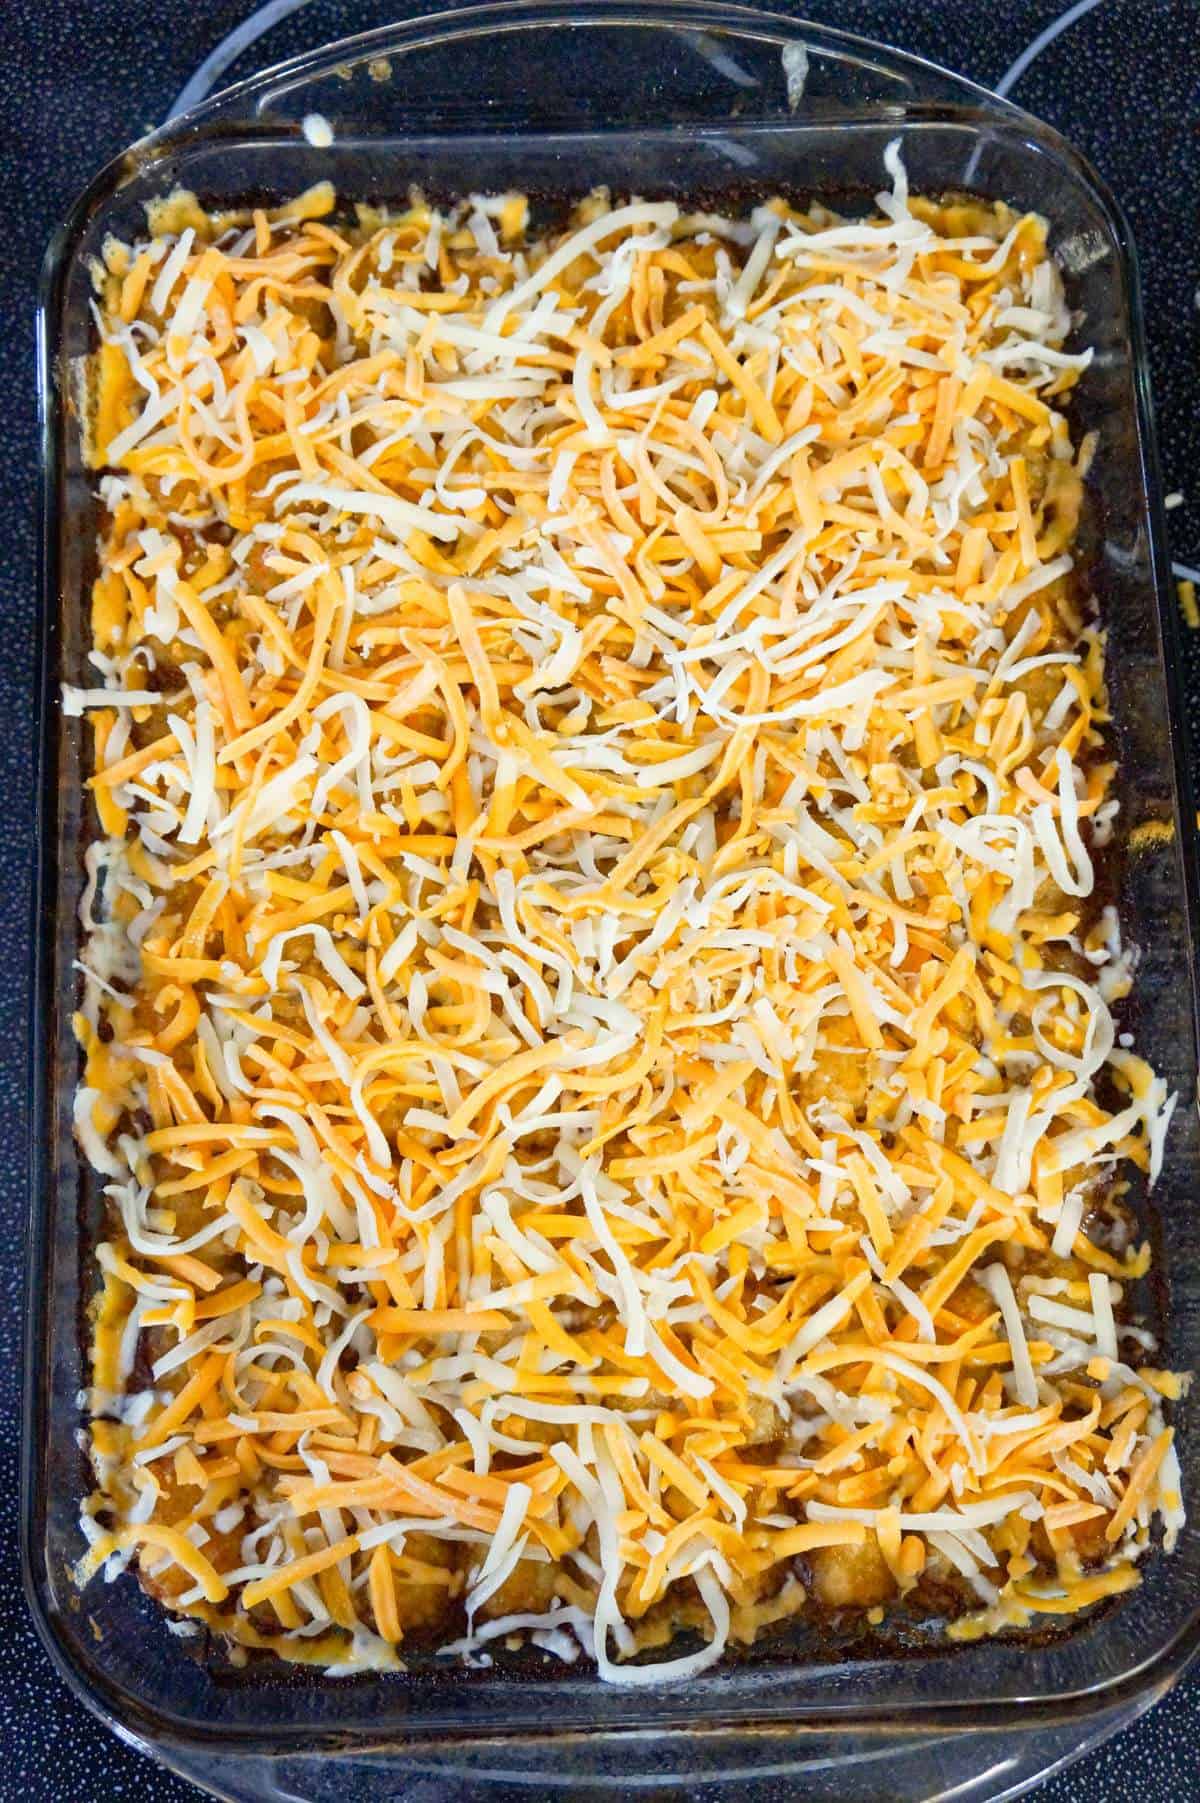 shredded mozzarella and cheddar cheese on top of tater tot casserole